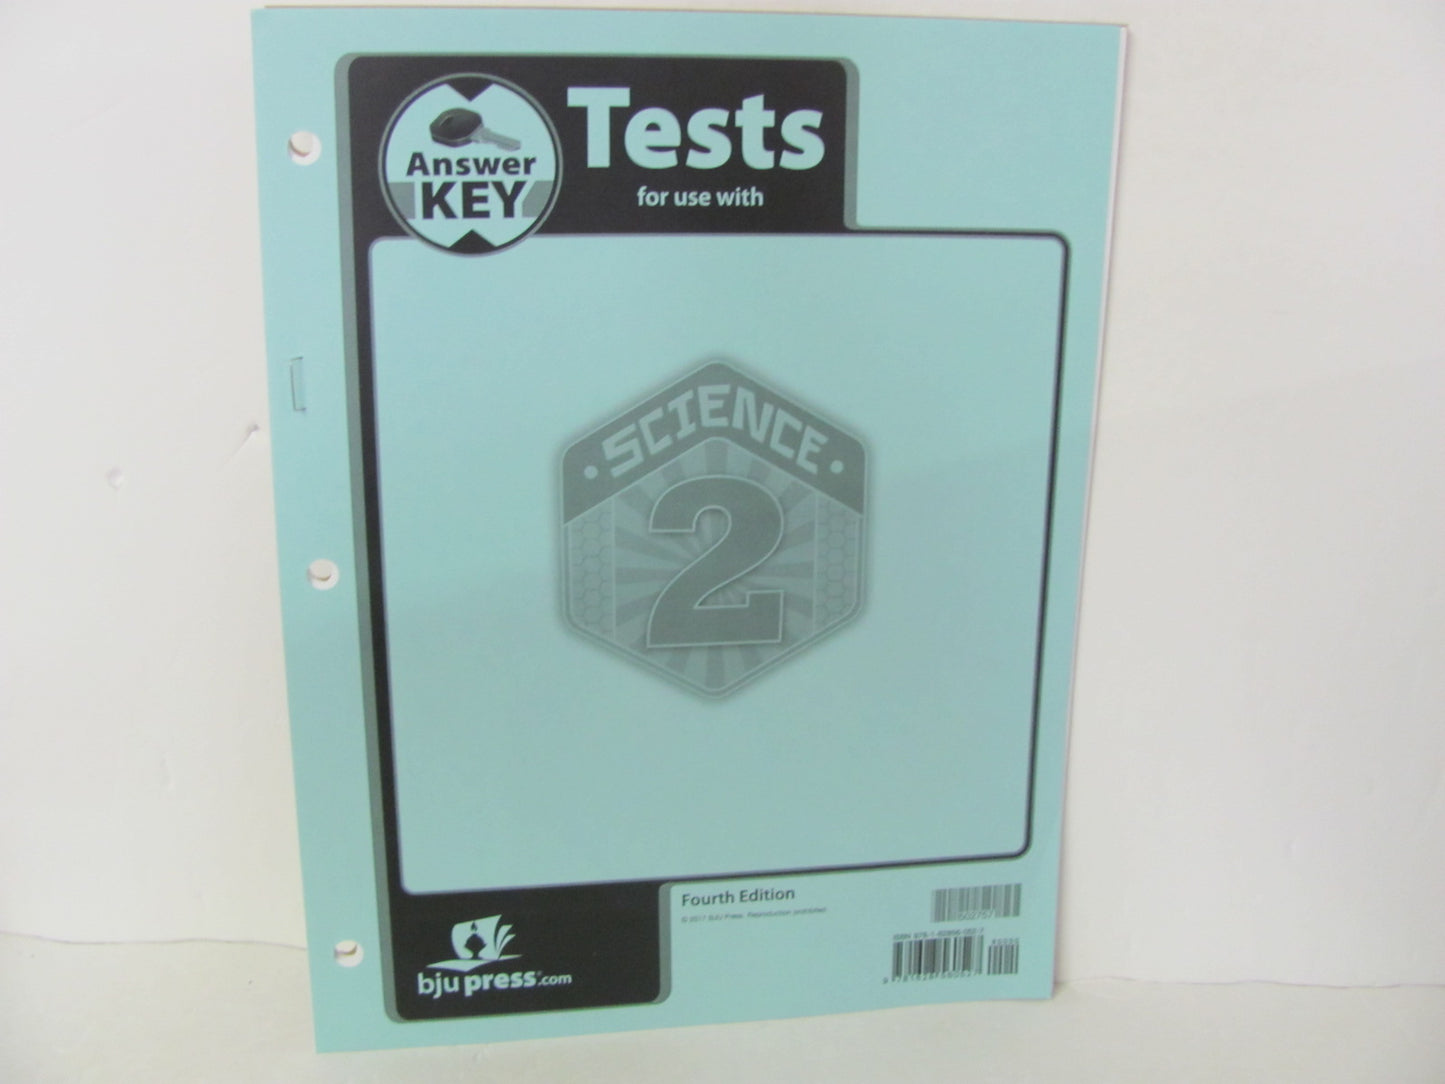 Science 2 BJU Press Test Key Pre-Owned 2nd Grade Science Textbooks